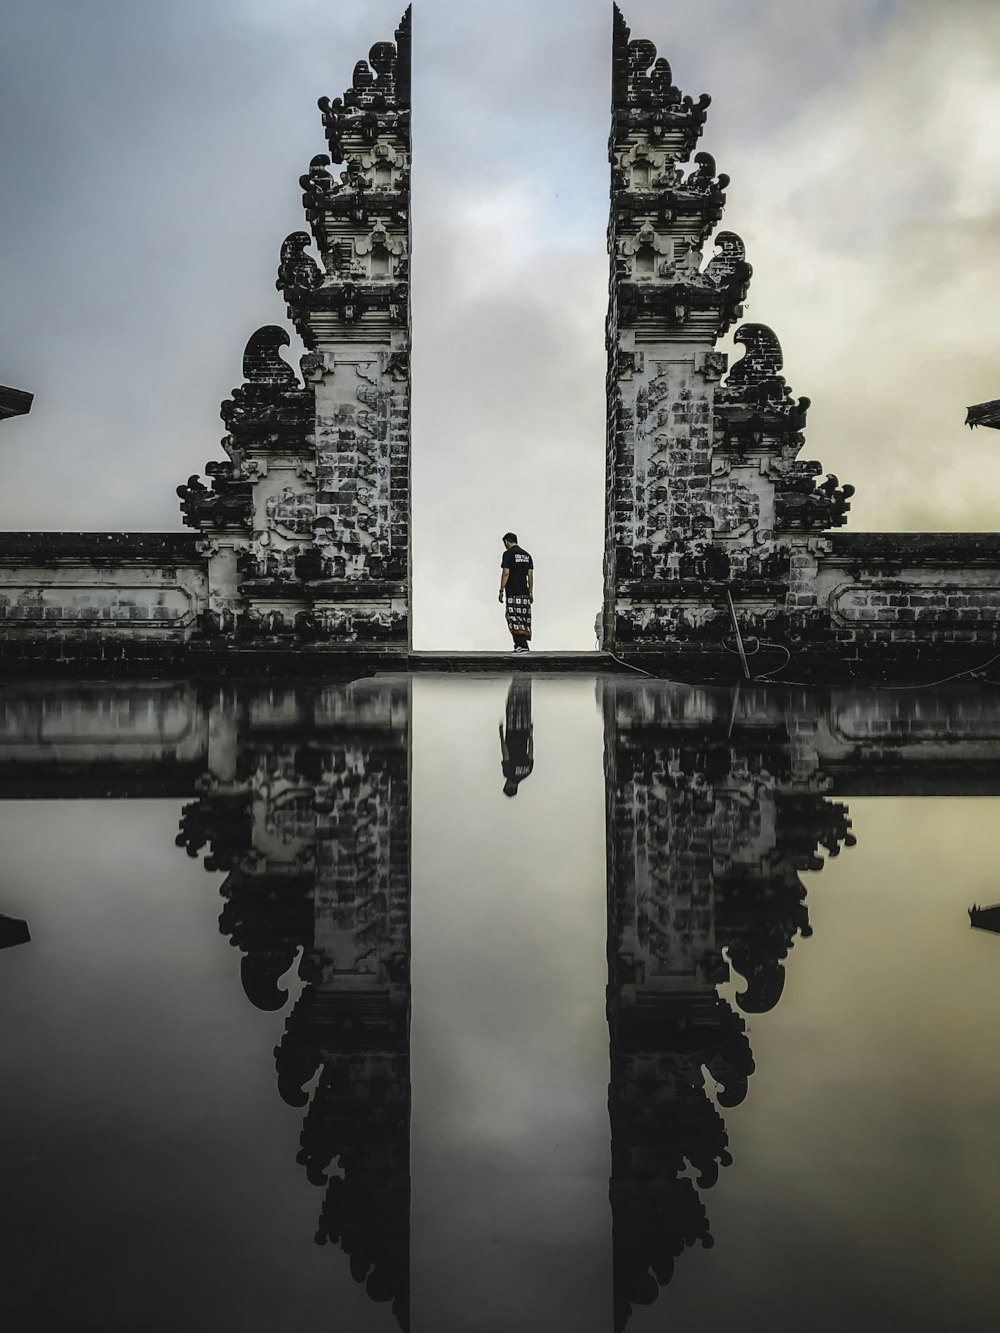 100 Beautiful Bali Images Download Free Pictures On Unsplash